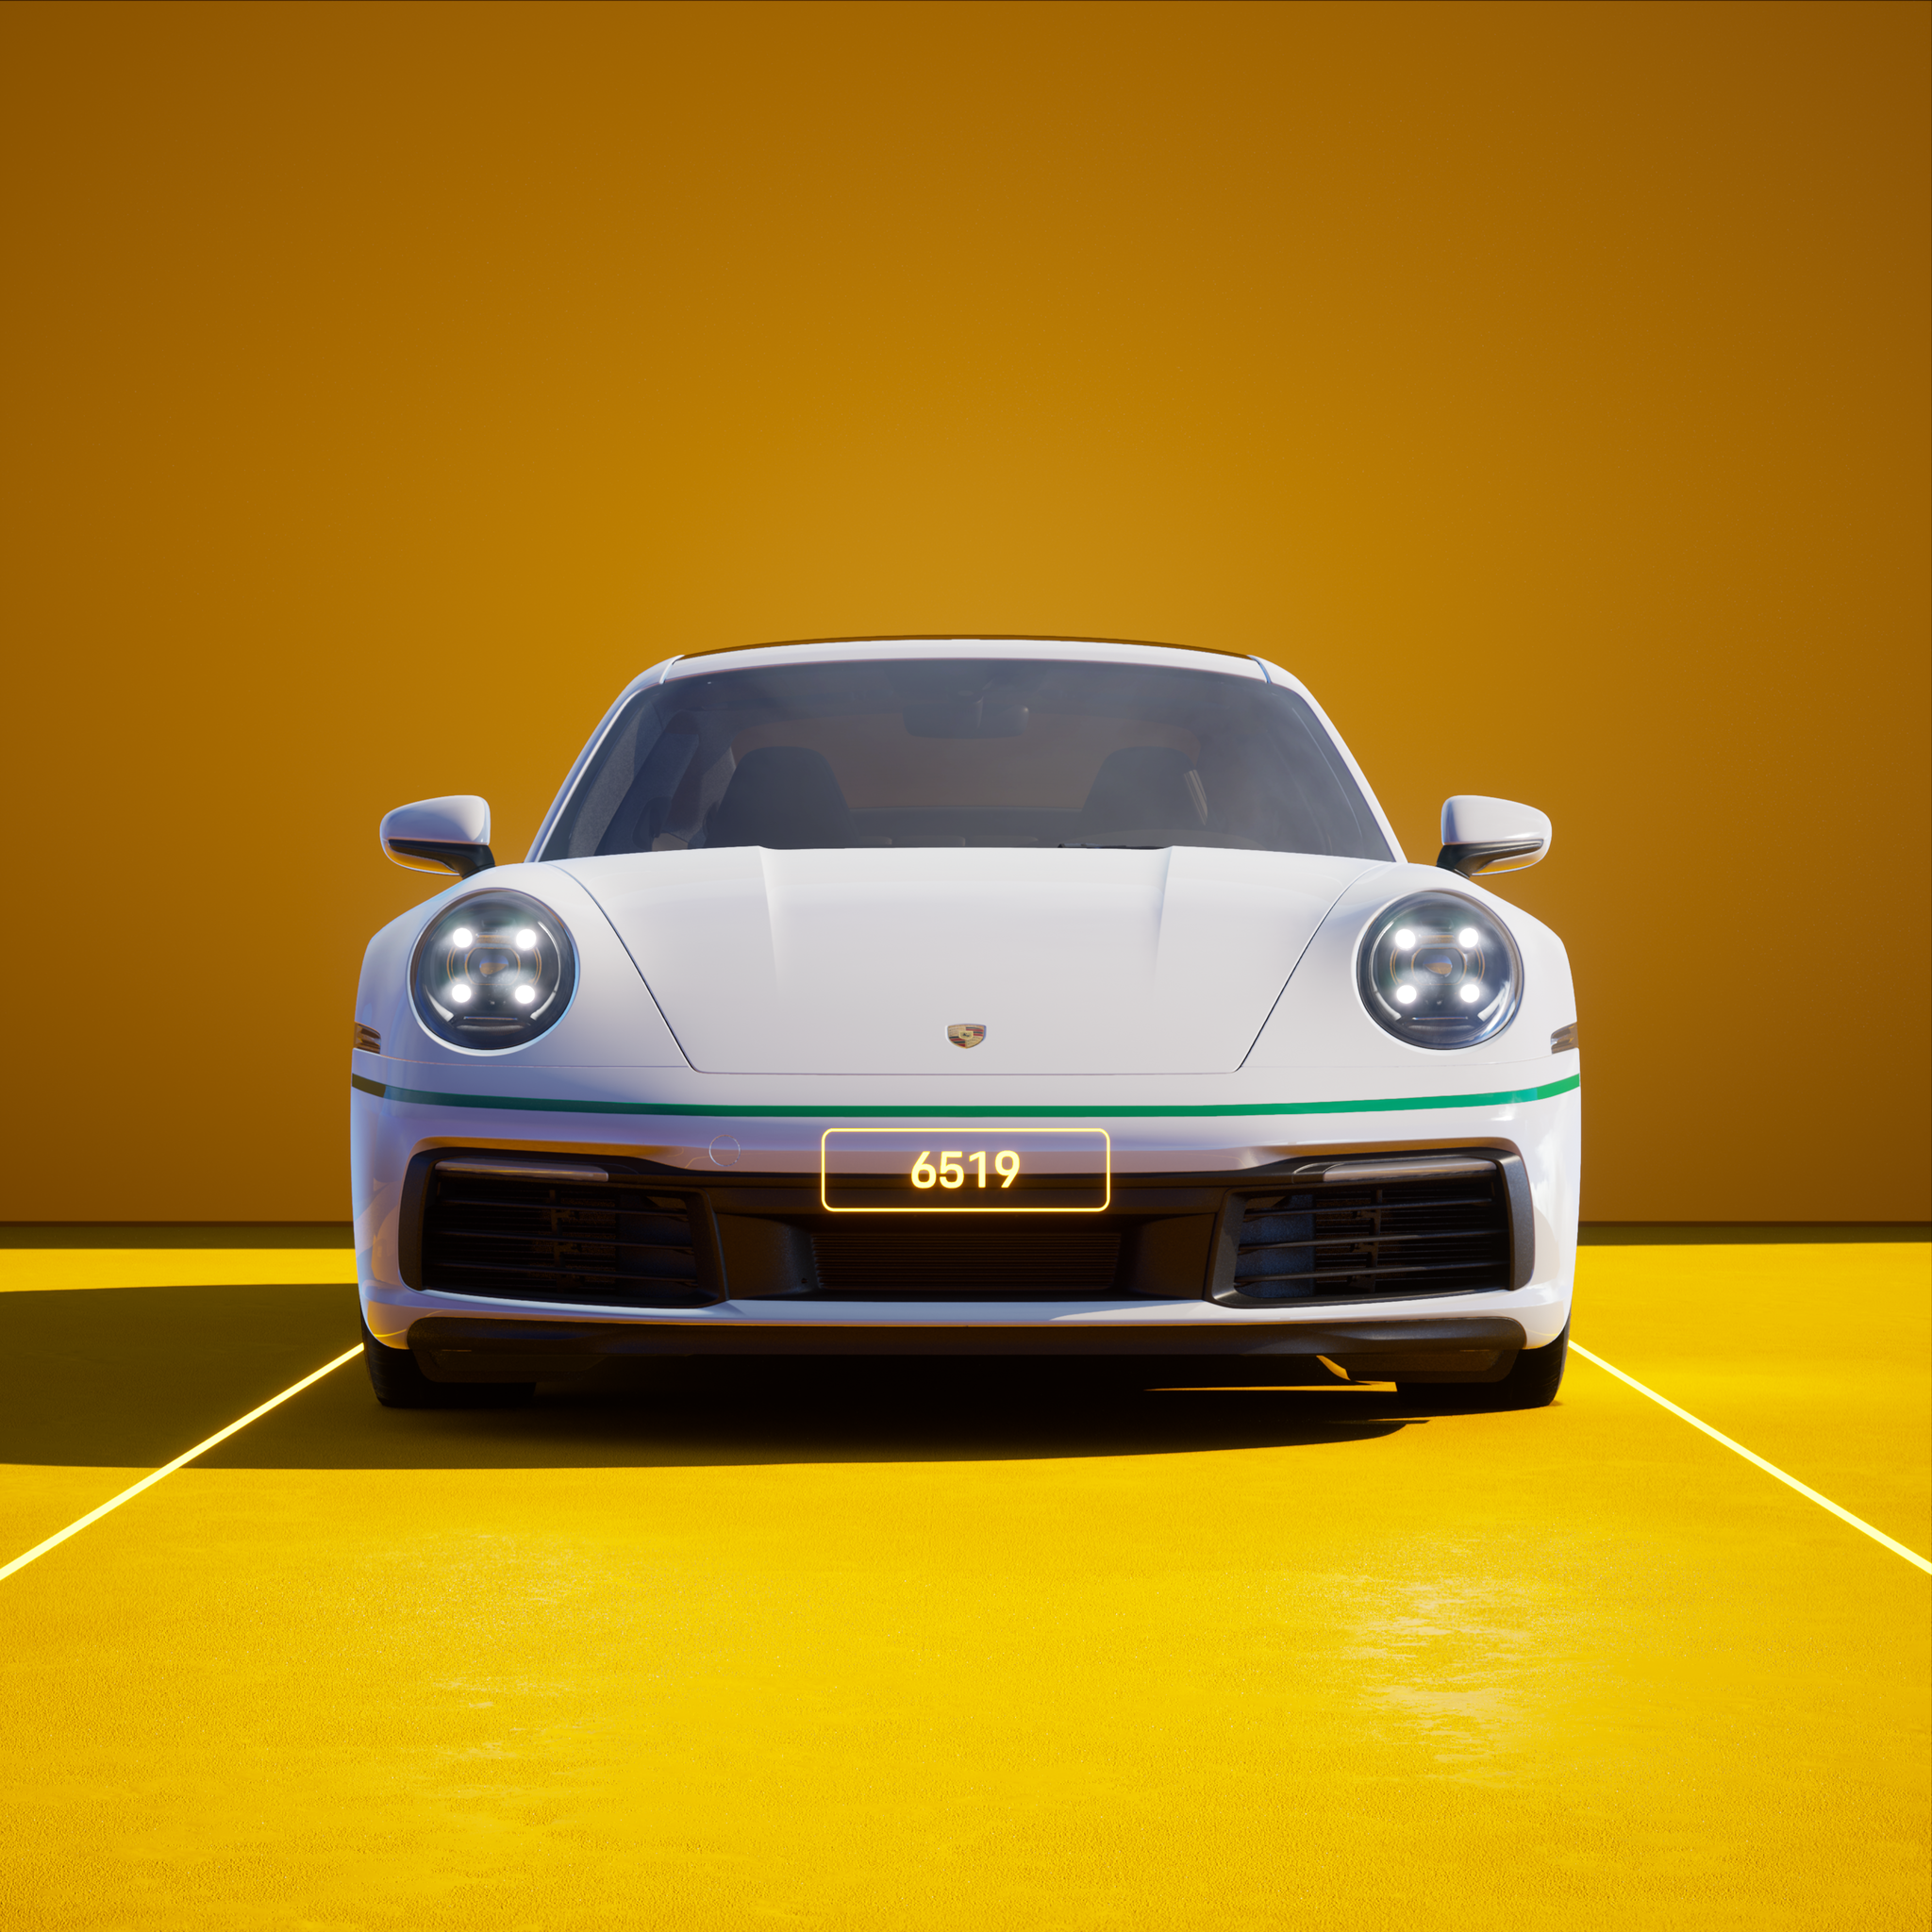 The PORSCHΞ 911 6519 image in phase